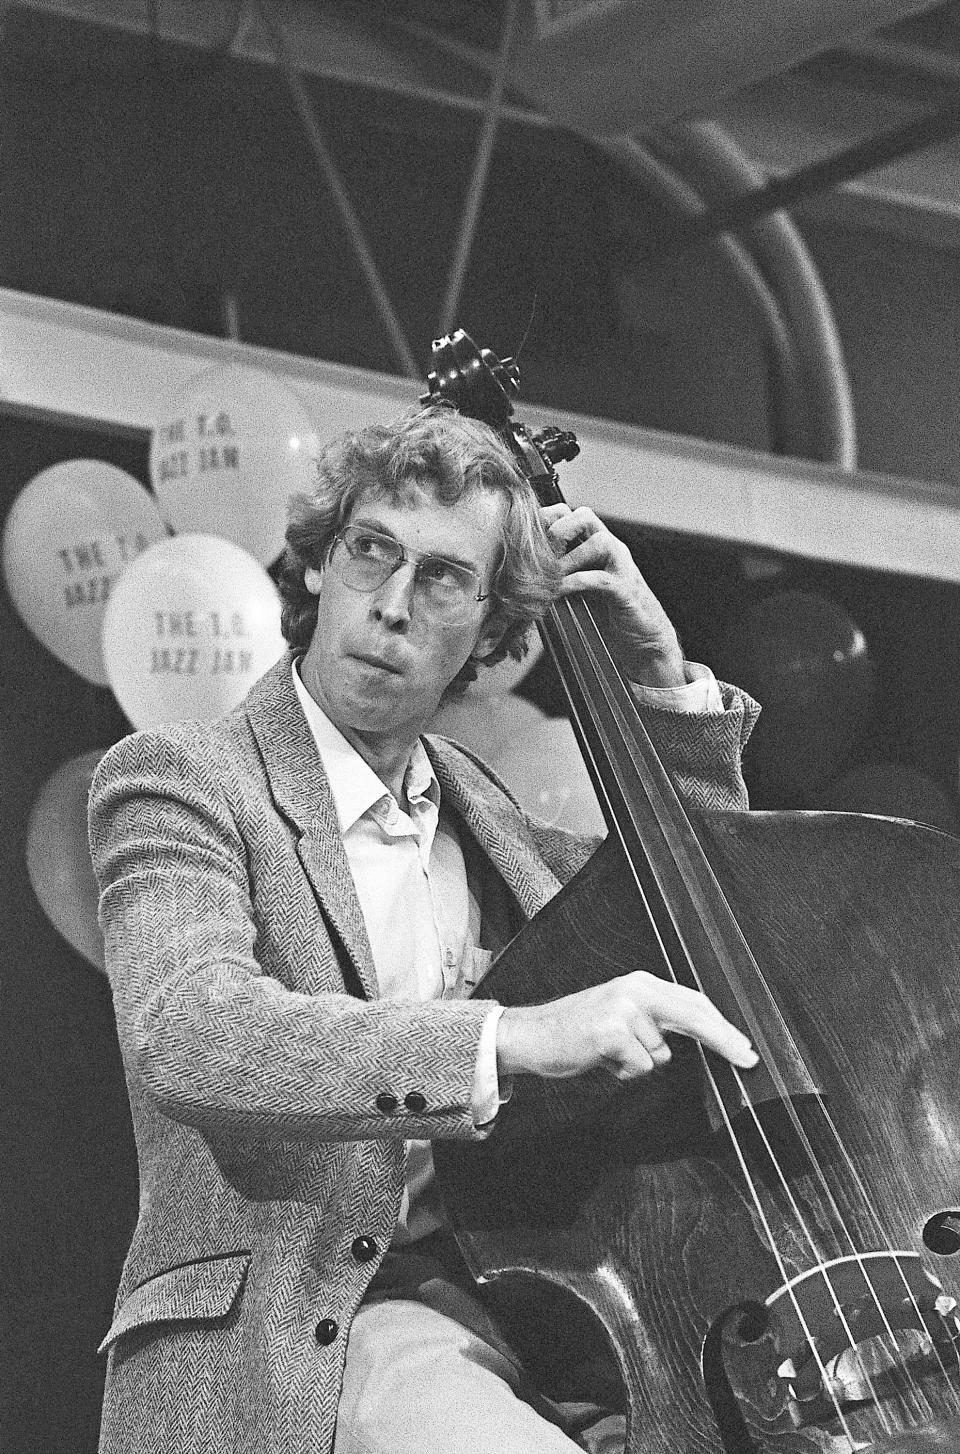 In this 1985 photo, provided by Mark Miller is Canadian bassist Neil Swainson during a performance in Toronto. A forgotten studio recording of the late jazz trumpeter Woody Shaw was released Sept. 11, 2020 on digital, as part of the latest effort to preserve jazz history. Vancouver, Canada-based Cellar Music Group’s imprint Reel to Real and New York distributor la reserve records this month made available “49th Parallel” - a 1987 recording led by Canadian bassist Swainson that features Shaw and tenor saxophonist Joe Henderson. (Mark Miller via AP)